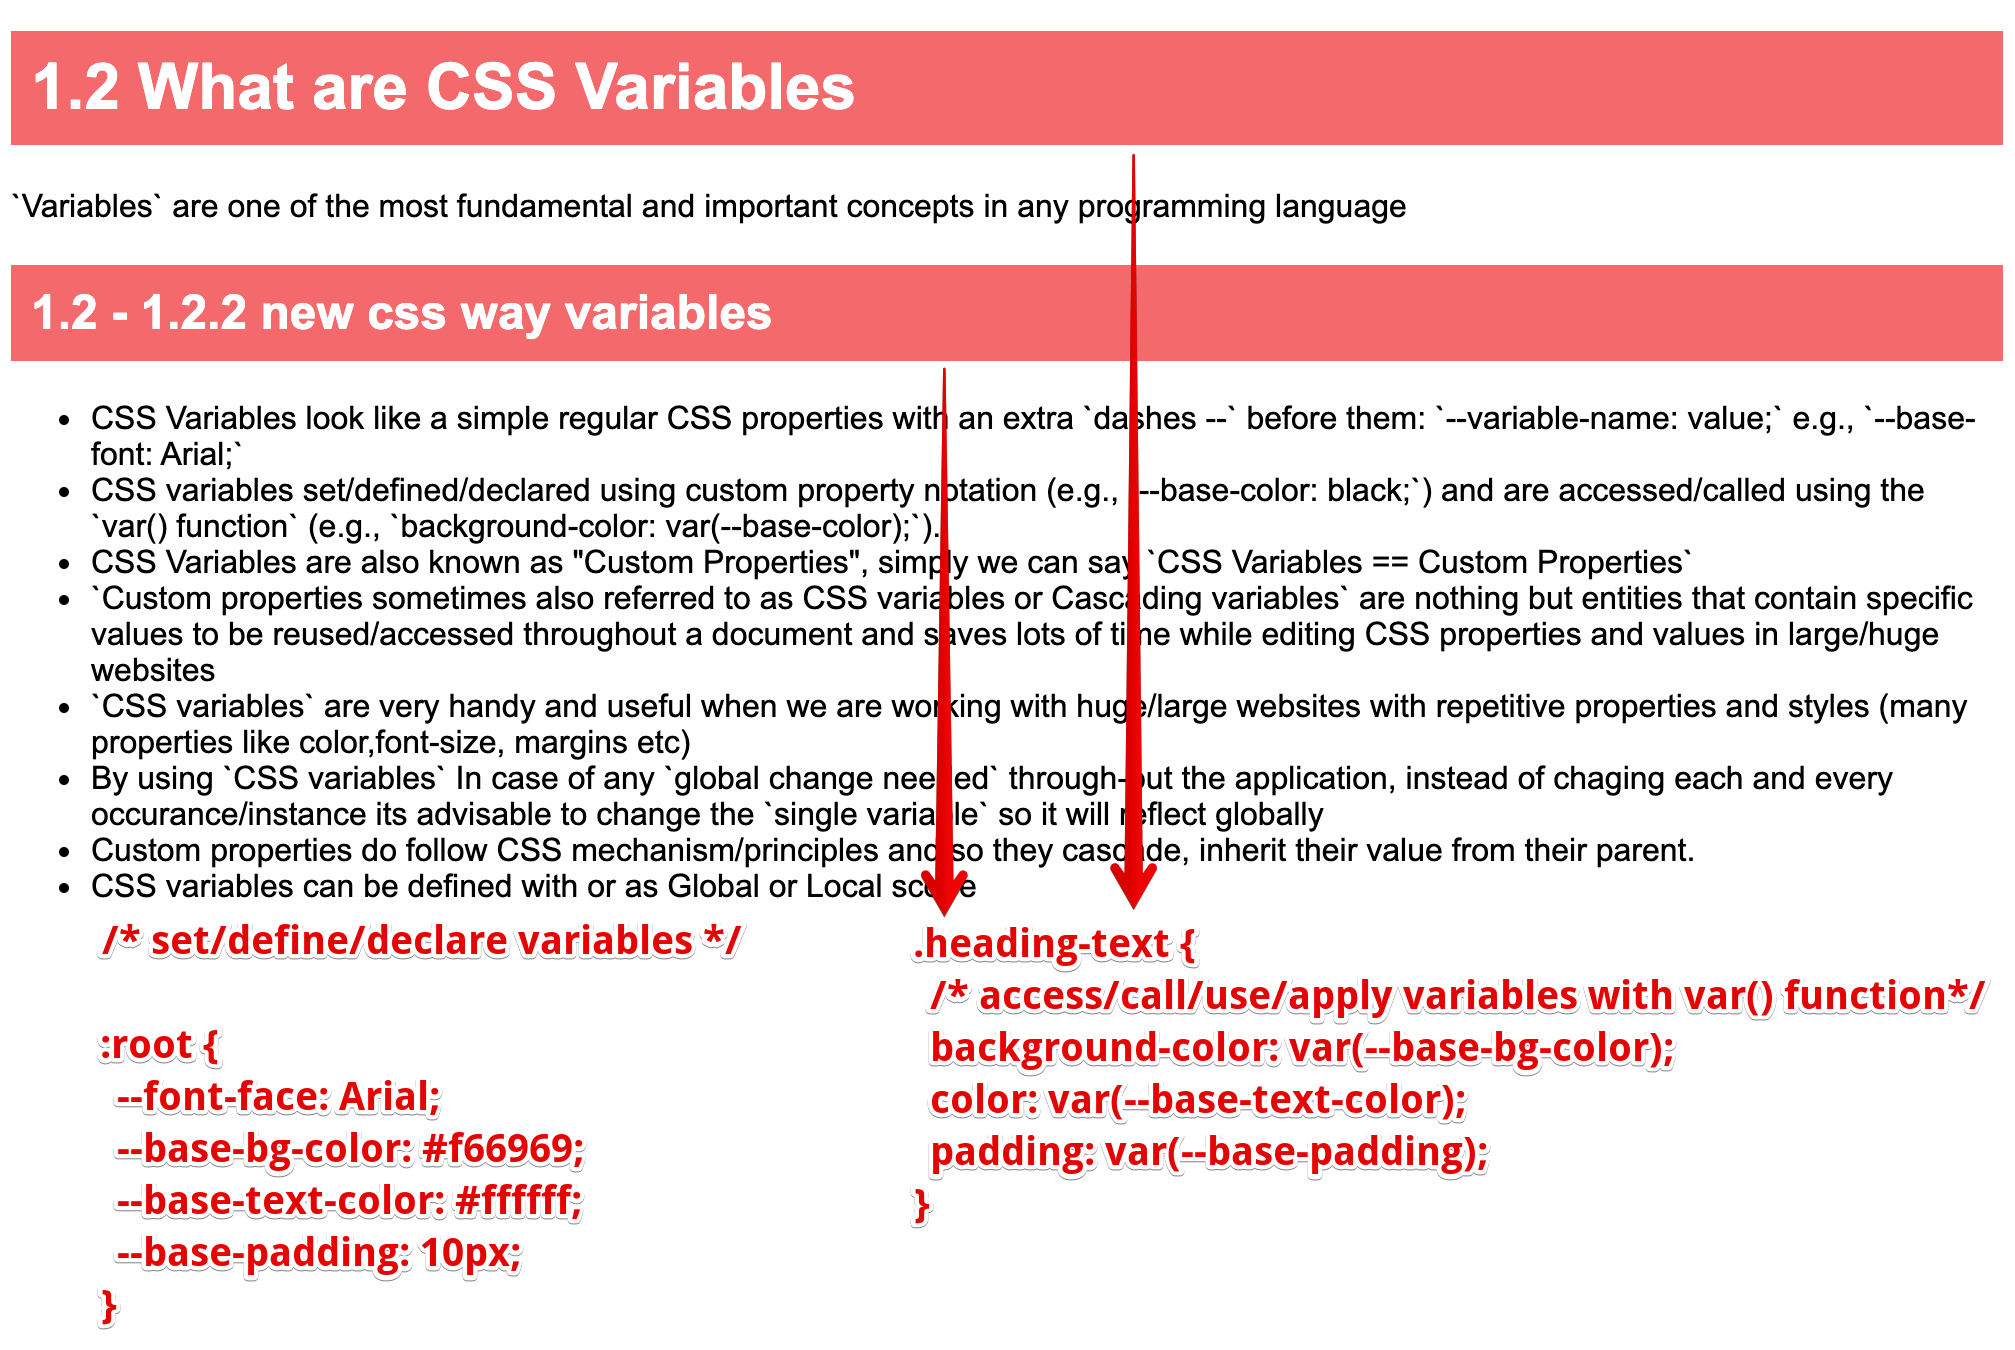 The new CSS way of using variables - DRY - Do Not Repeat Yourself principle